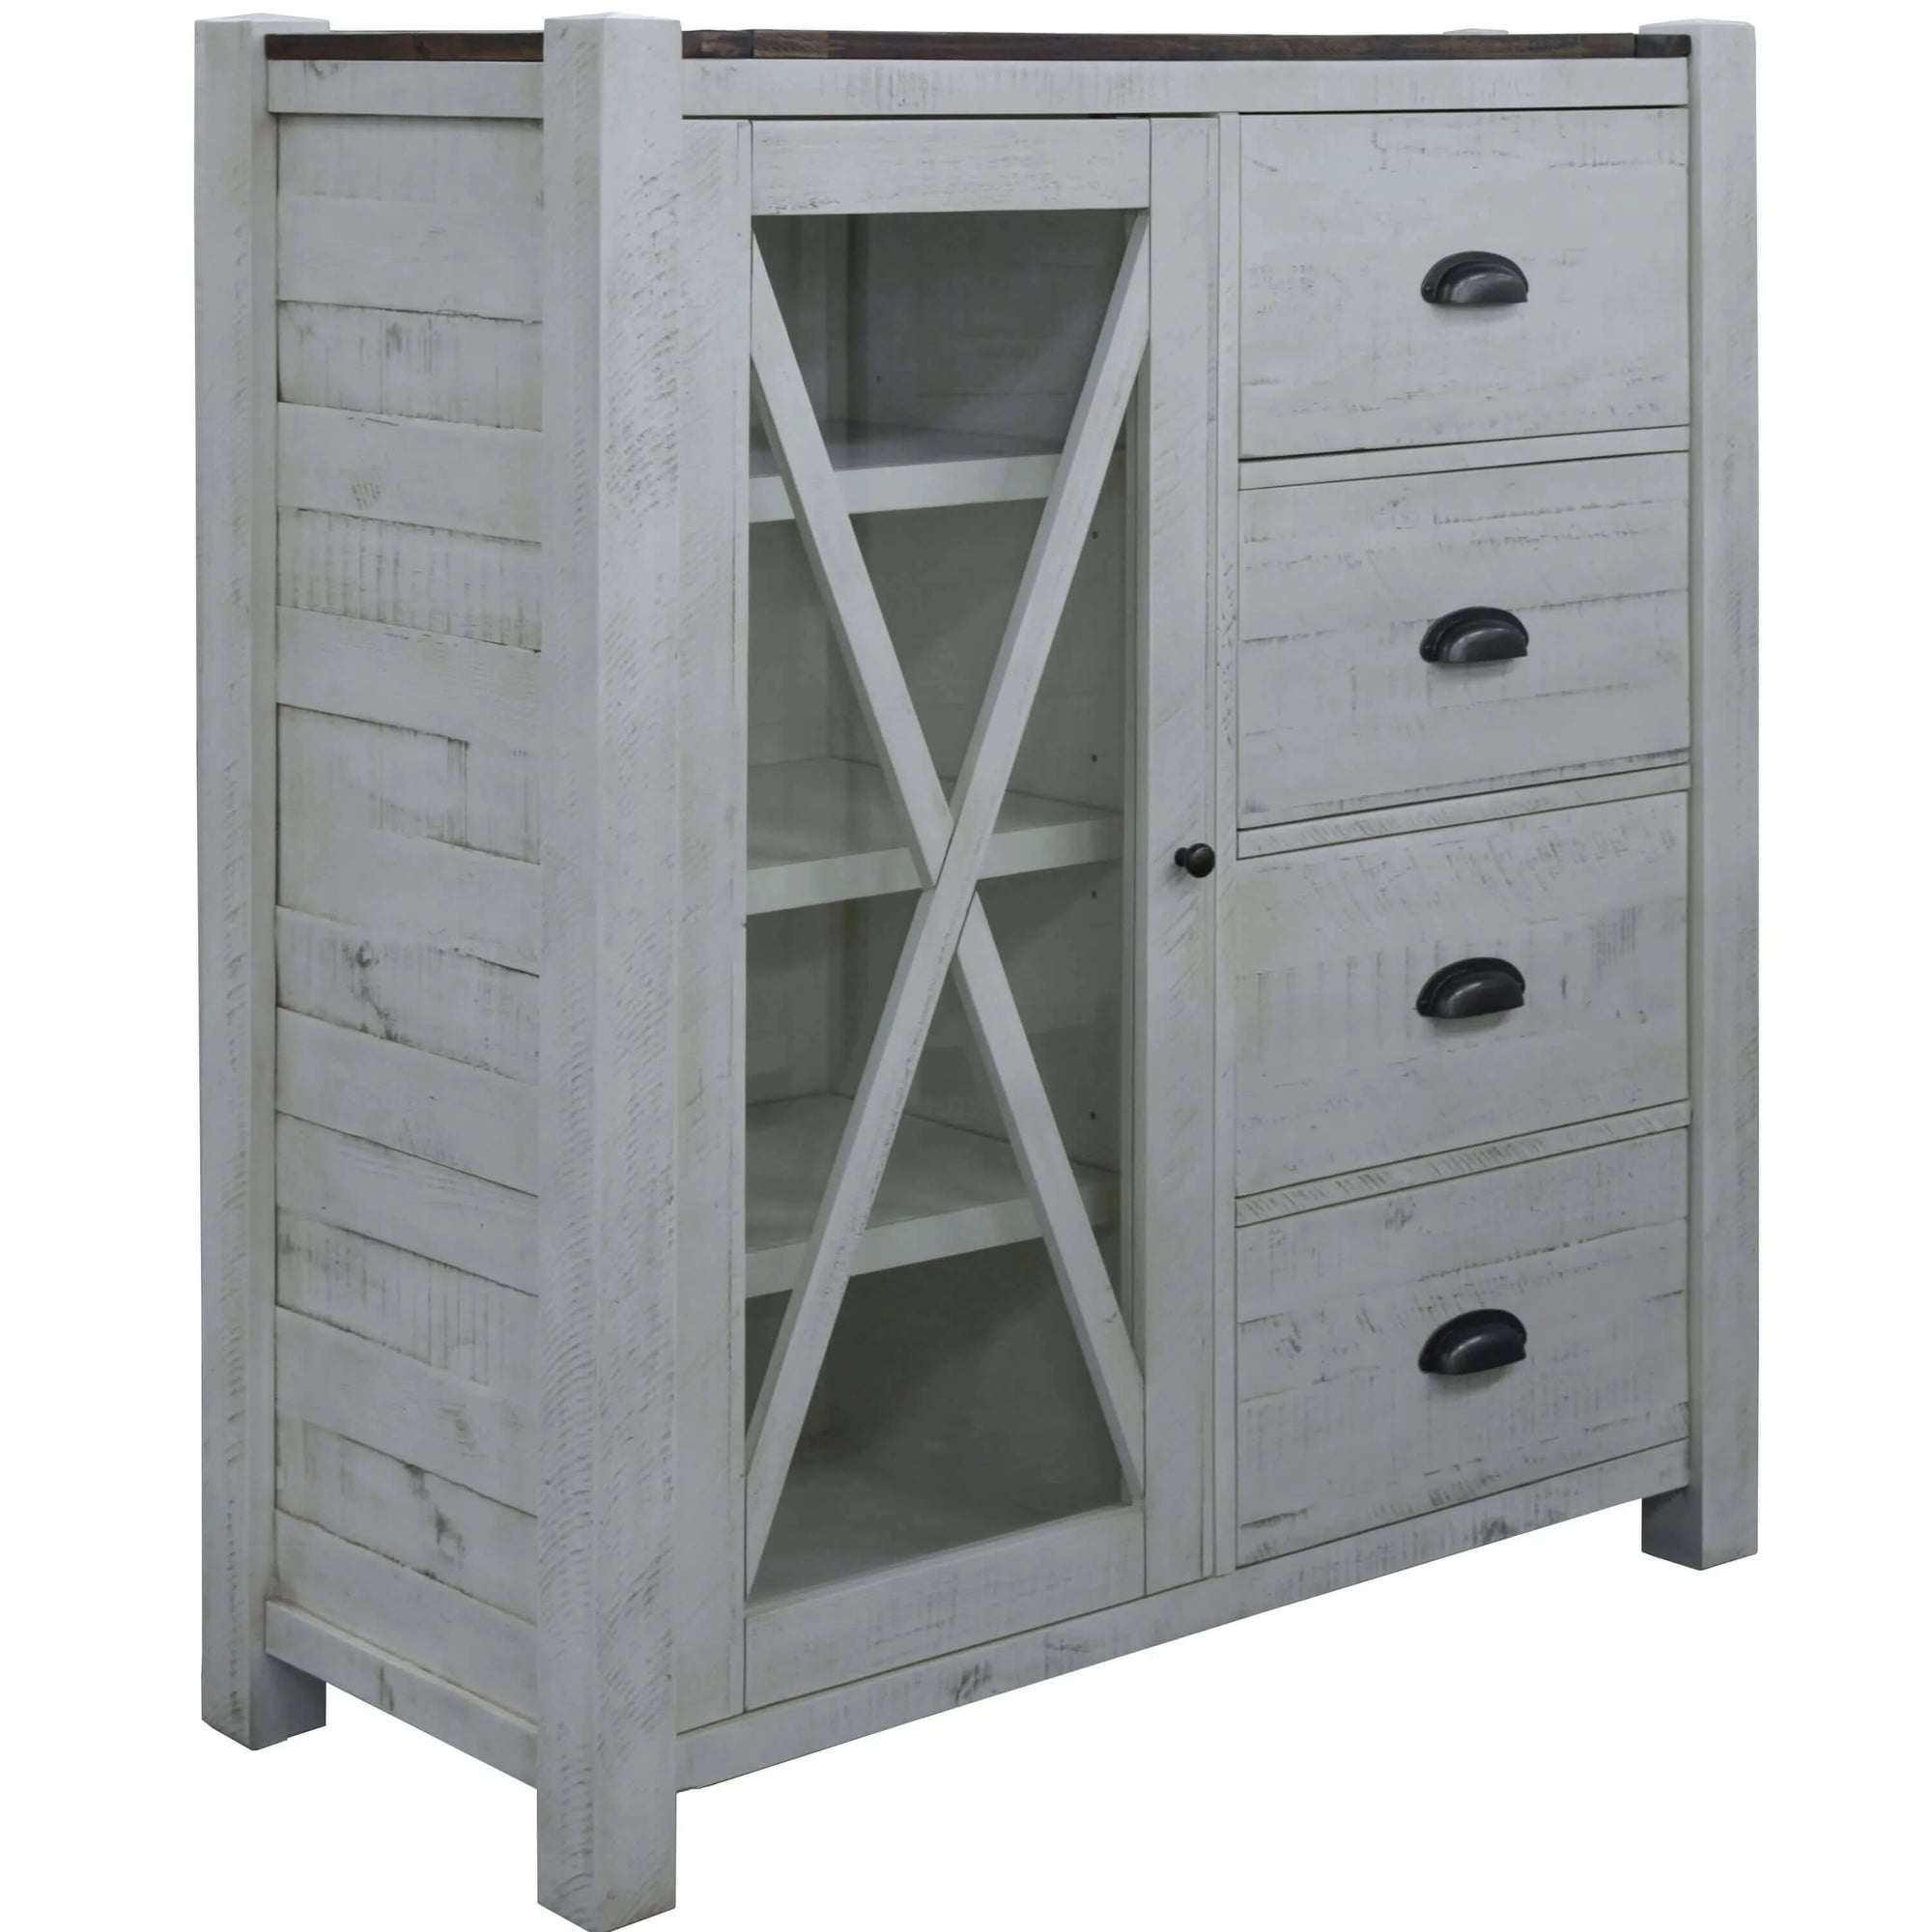 Buy erica tallboy 4 chest of drawers solid acacia timber wood cabinet brown white - upinteriors-Upinteriors